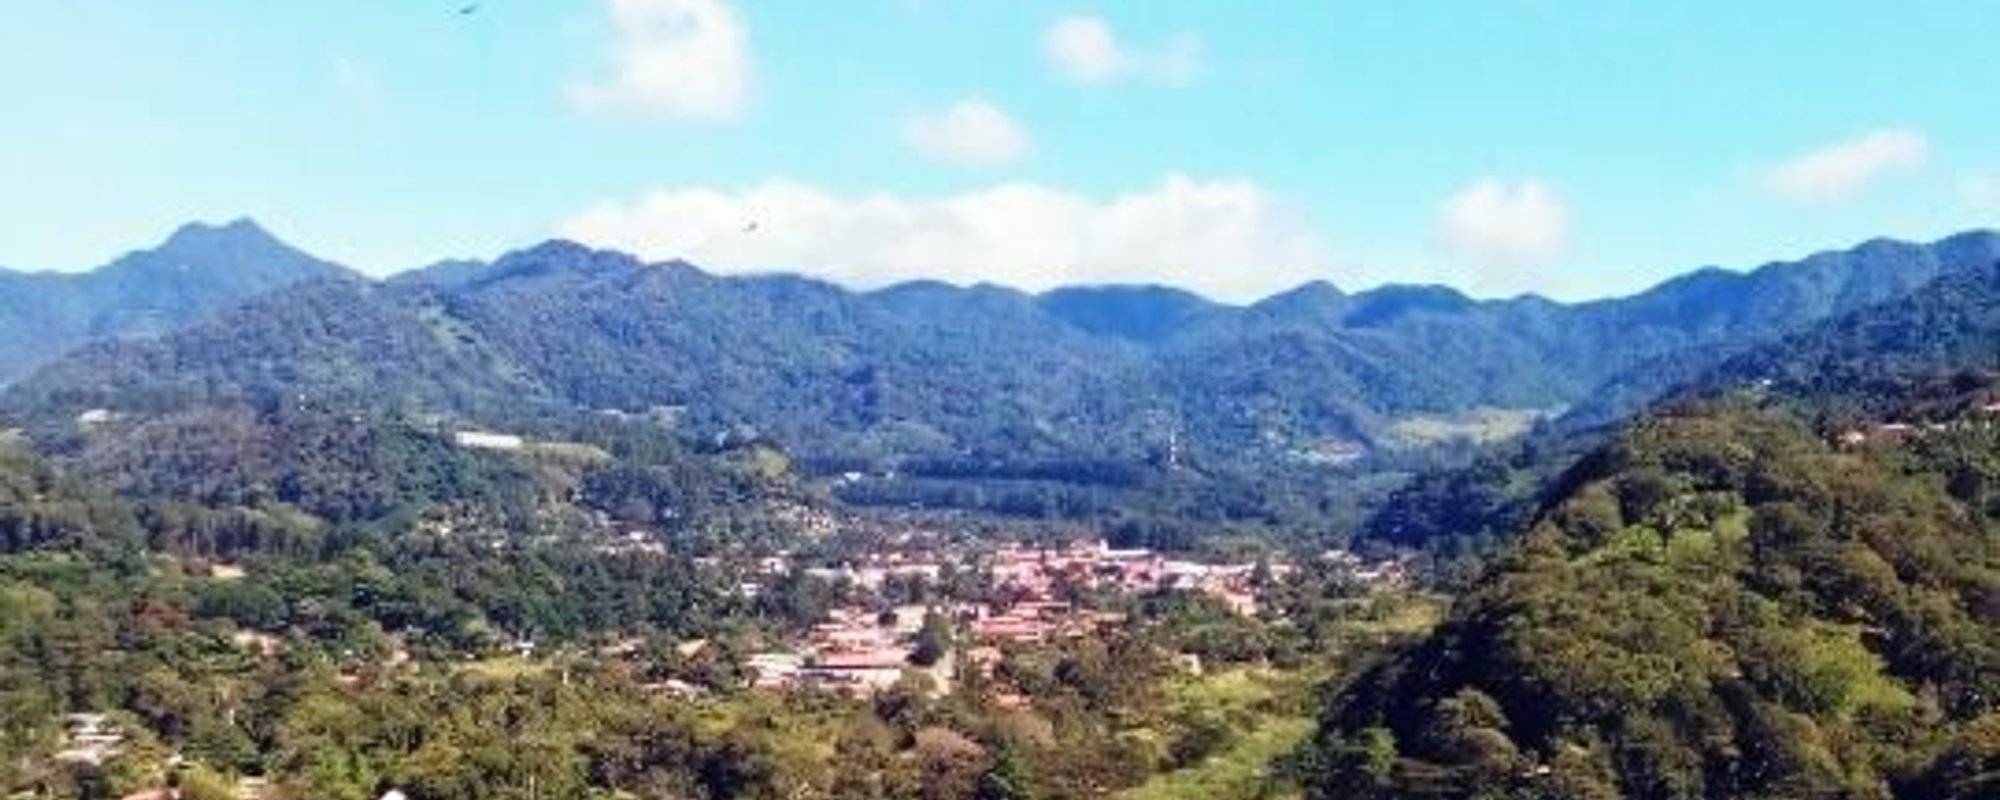 MORE THAN TEN FACTS YOU DIDN`T KNOW ABOUT BOQUETE, PANAMA